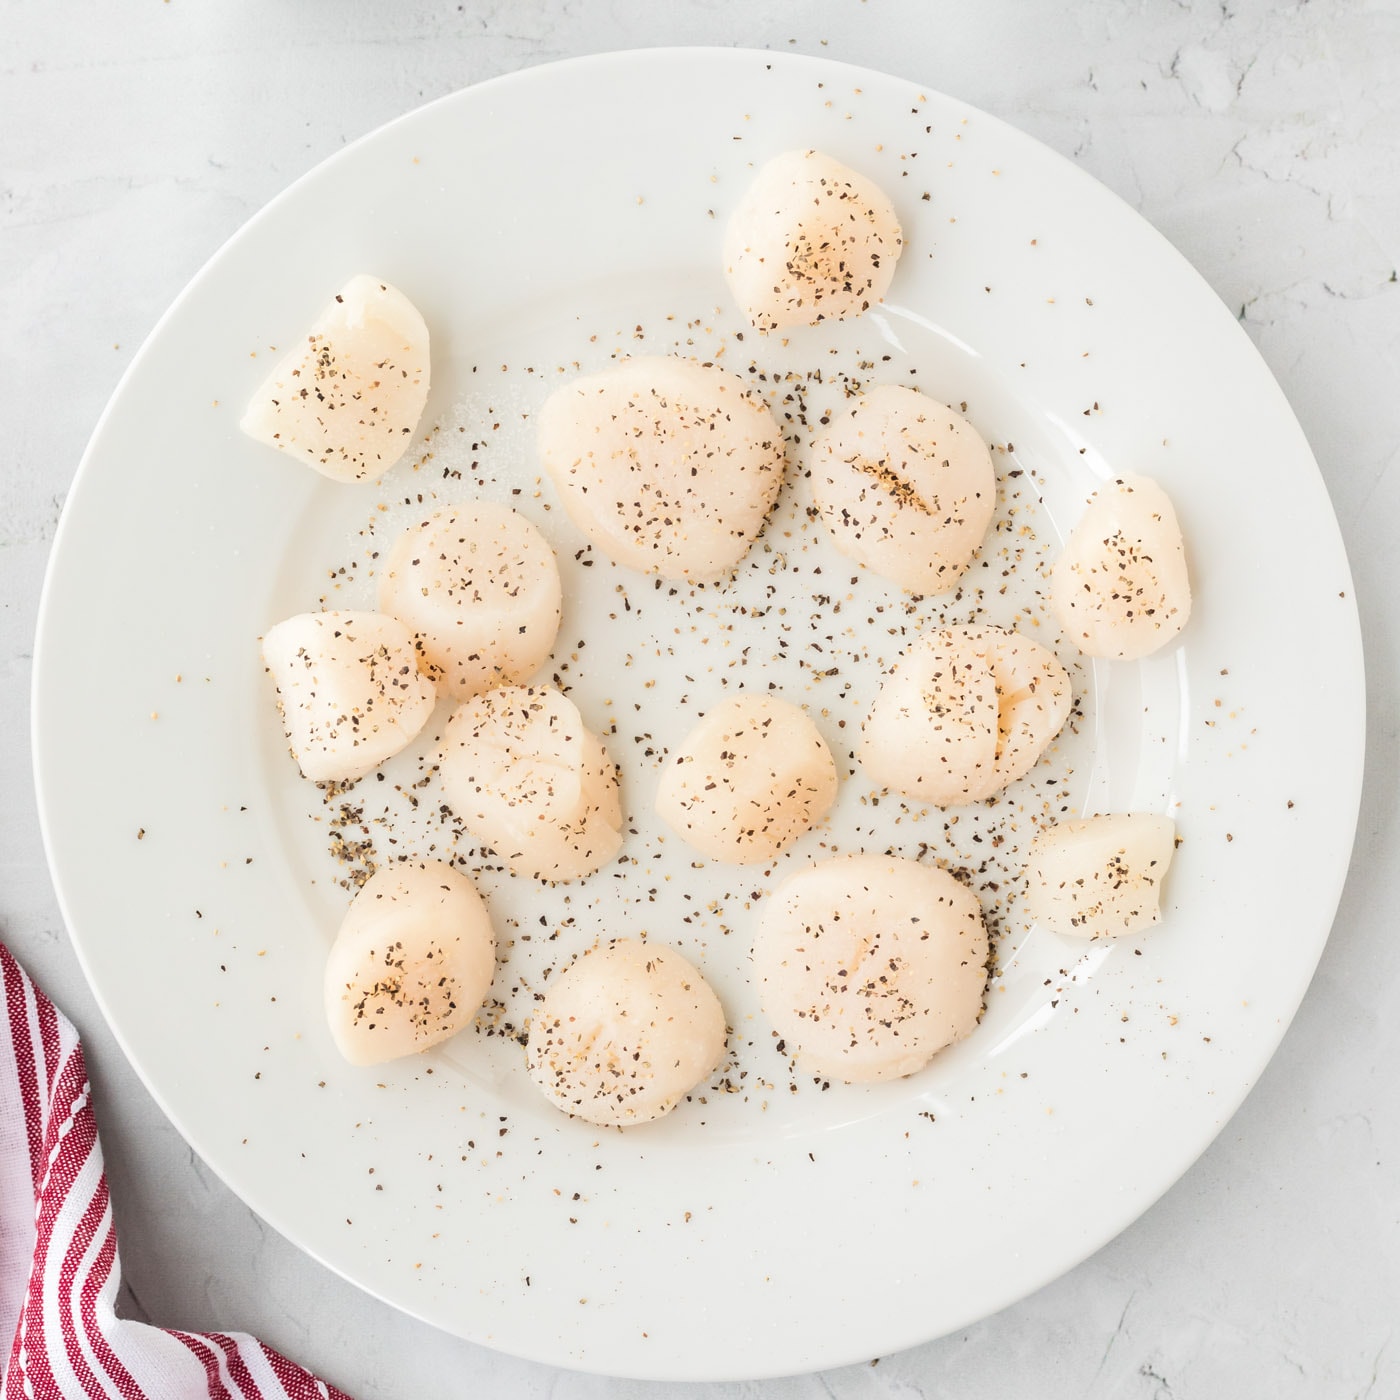 scallops seasoned with salt and pepper